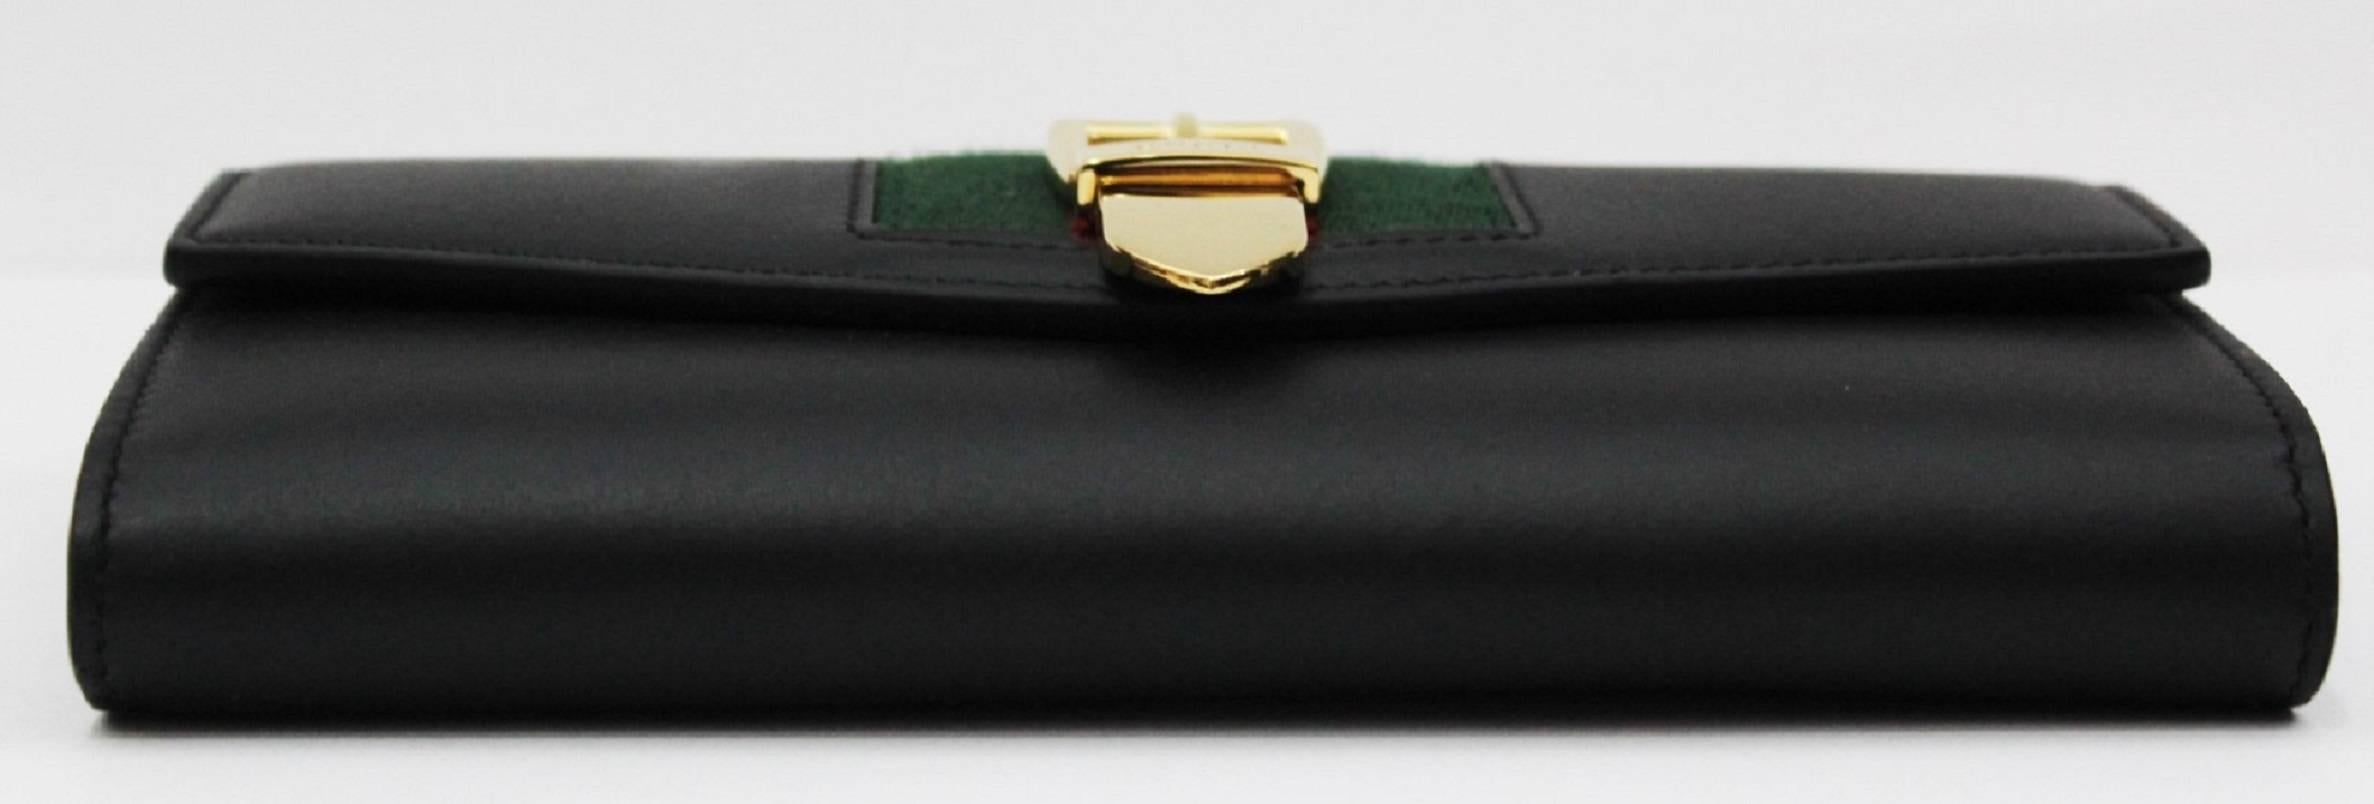 Gucci Sylvie Black Leather Continental Wallet 2